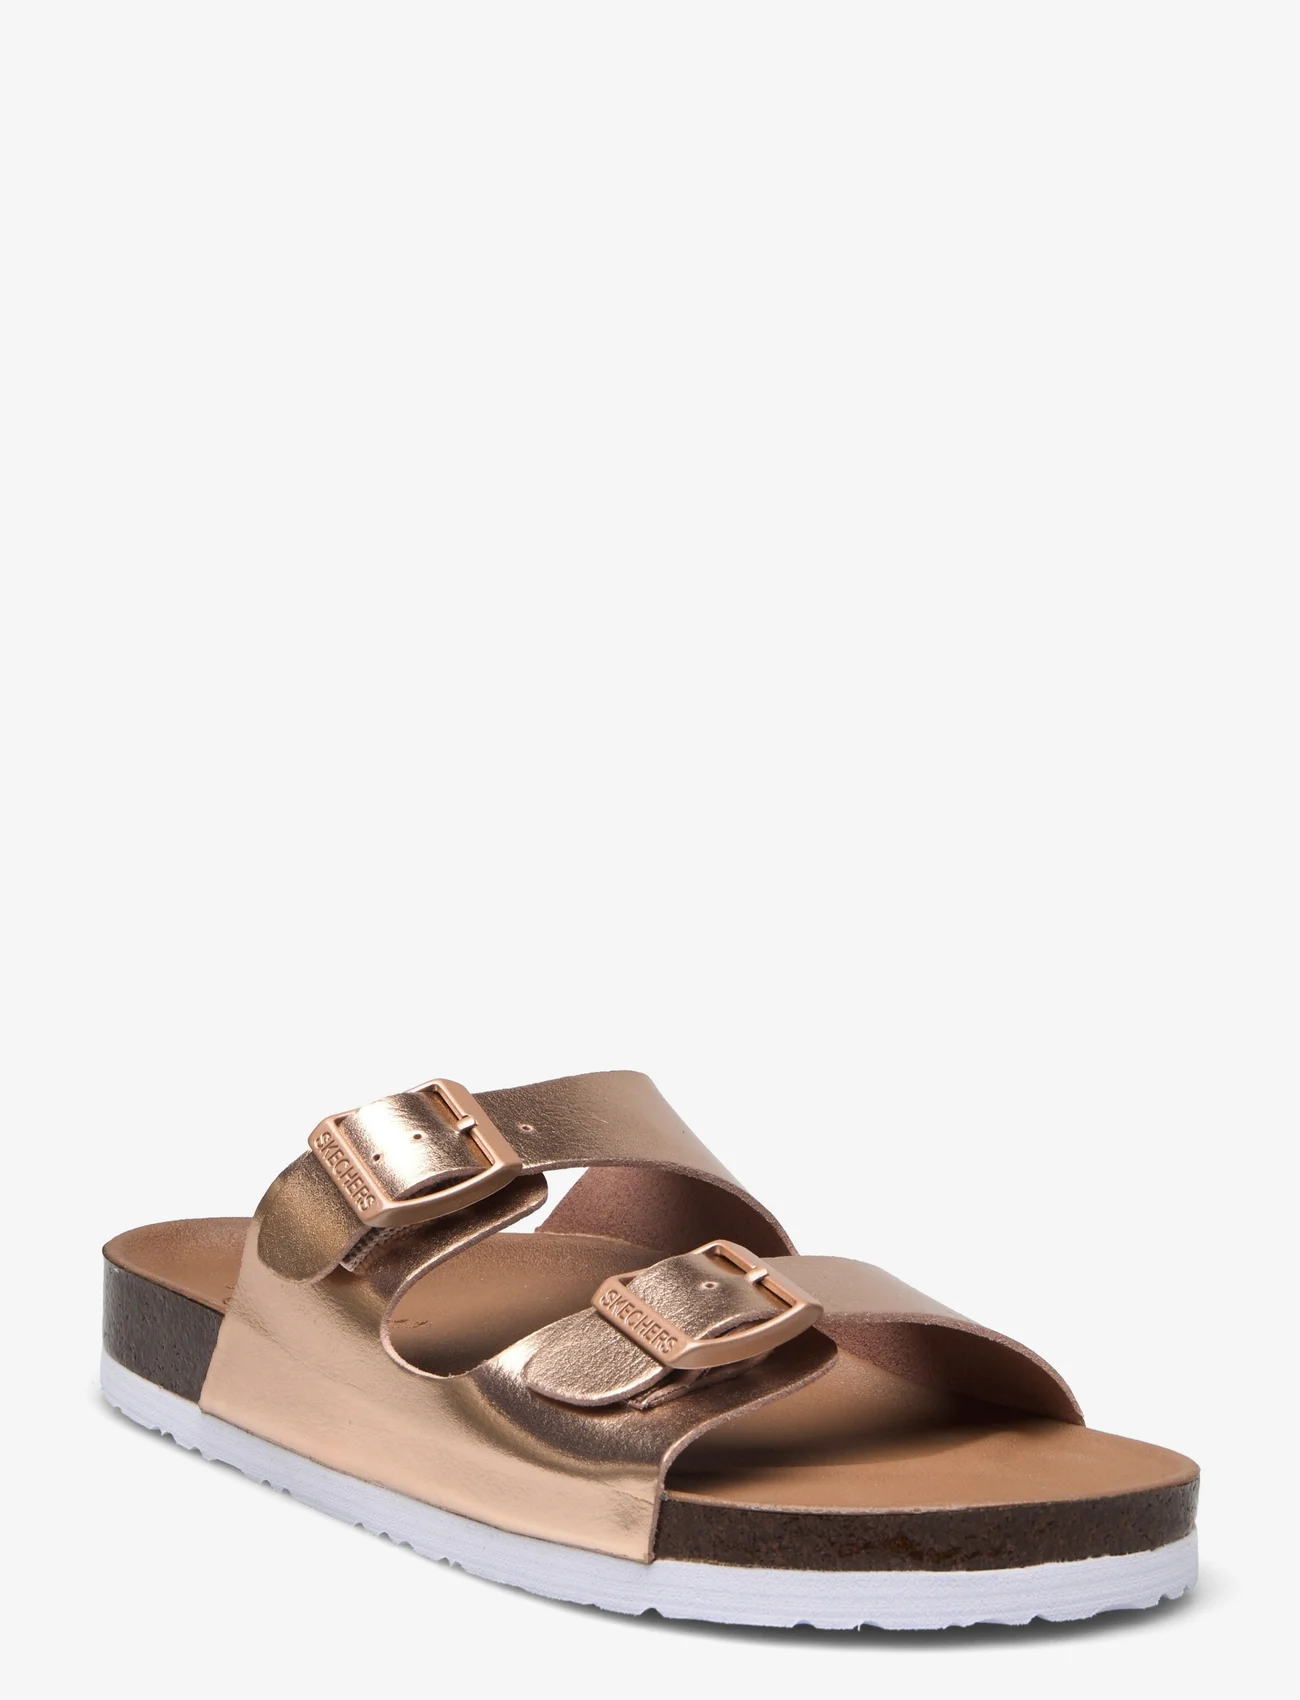 Skechers - Womens Relaxed Fit: Granola - Bloom Farm - flat sandals - rsgd rose gold - 0